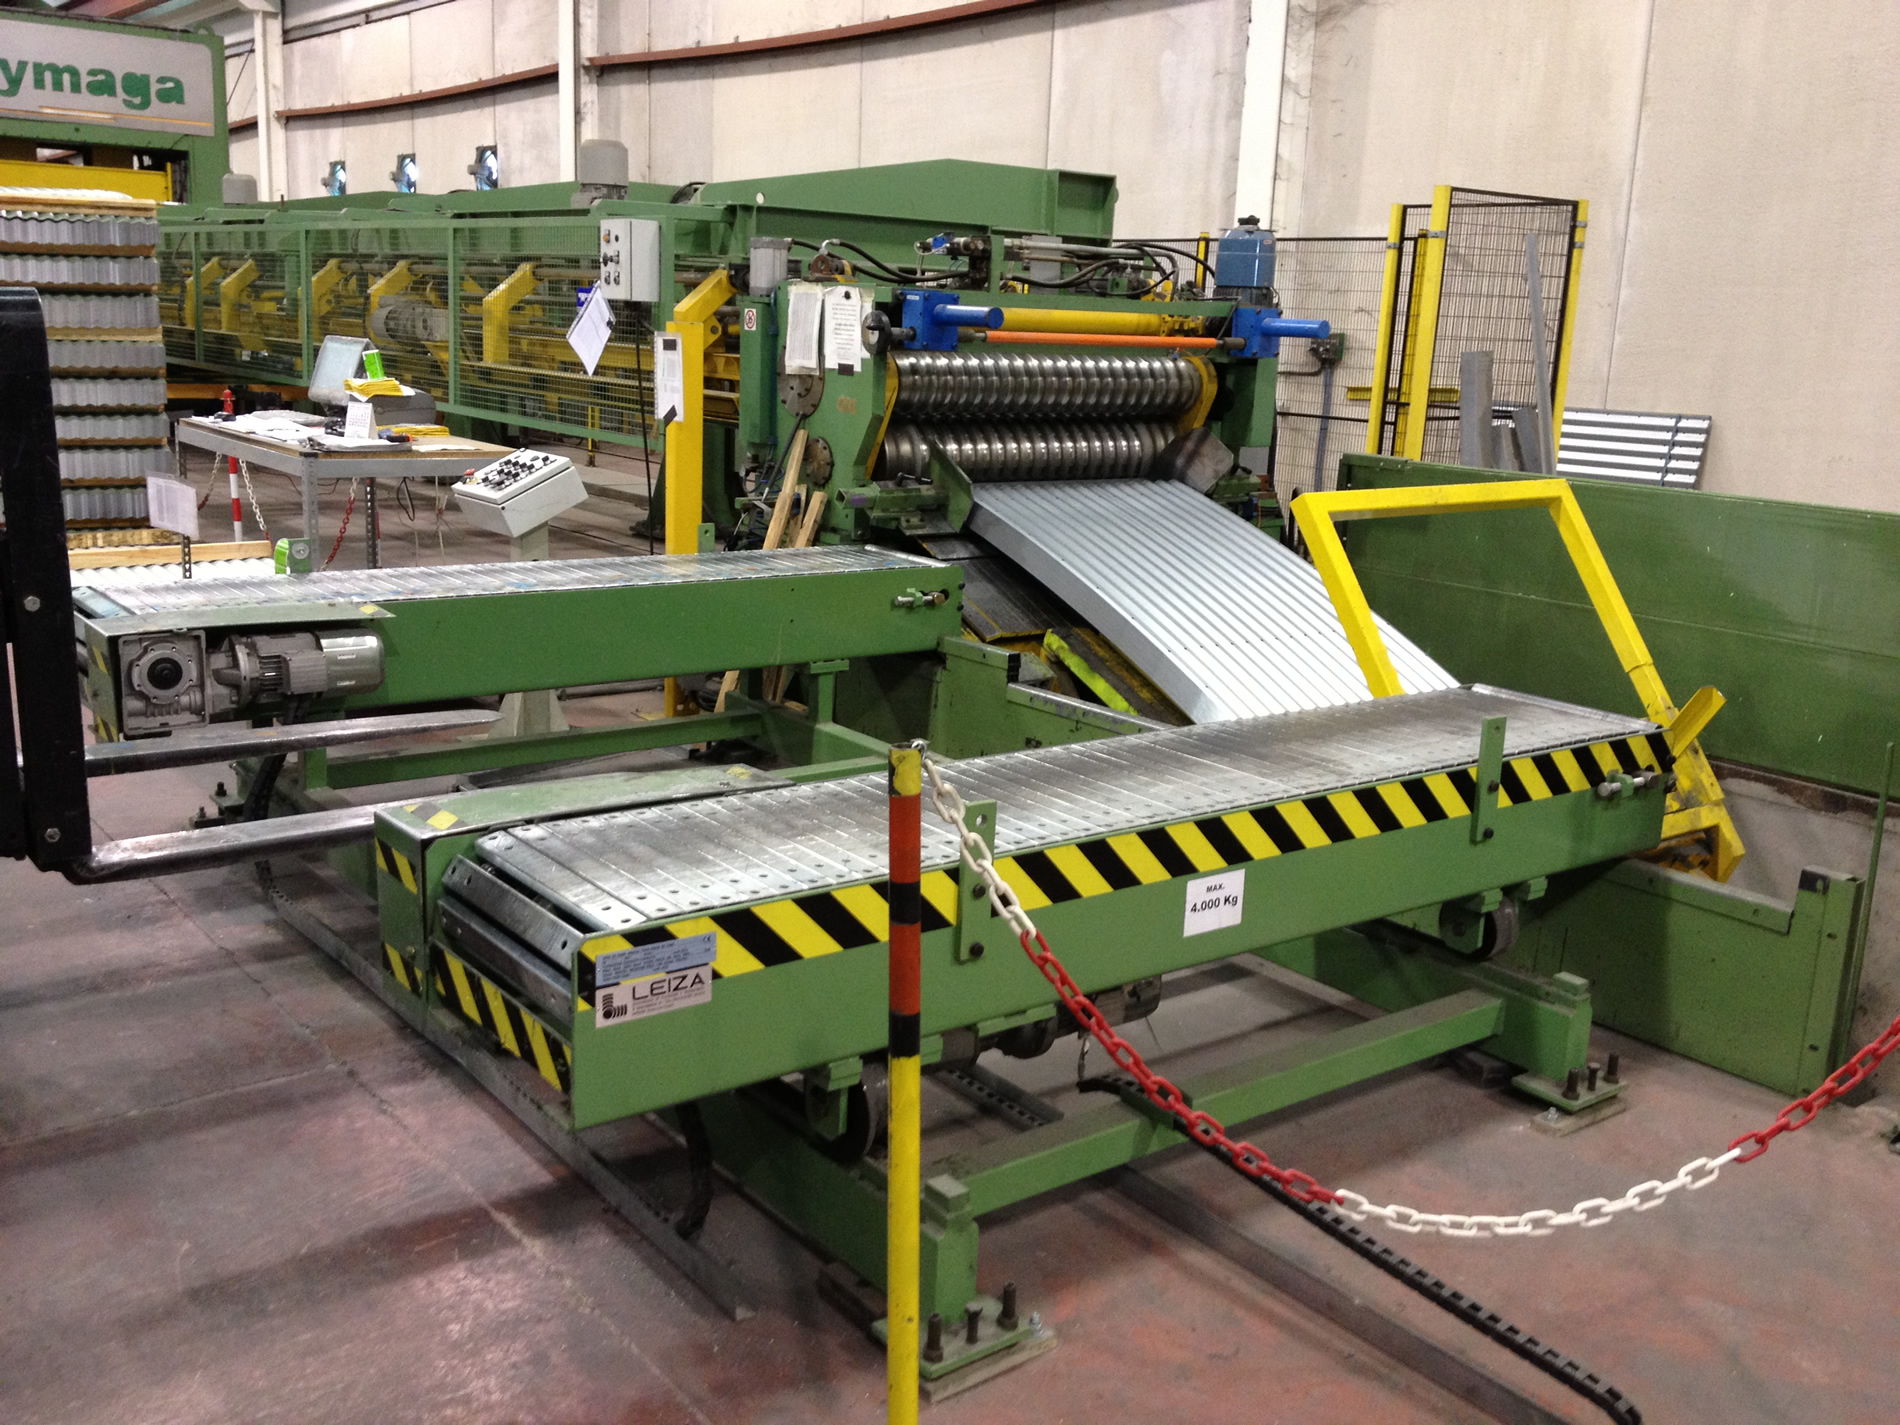 Design and production of slat conveyors. Both uniform design and V-shaped slat conveyors